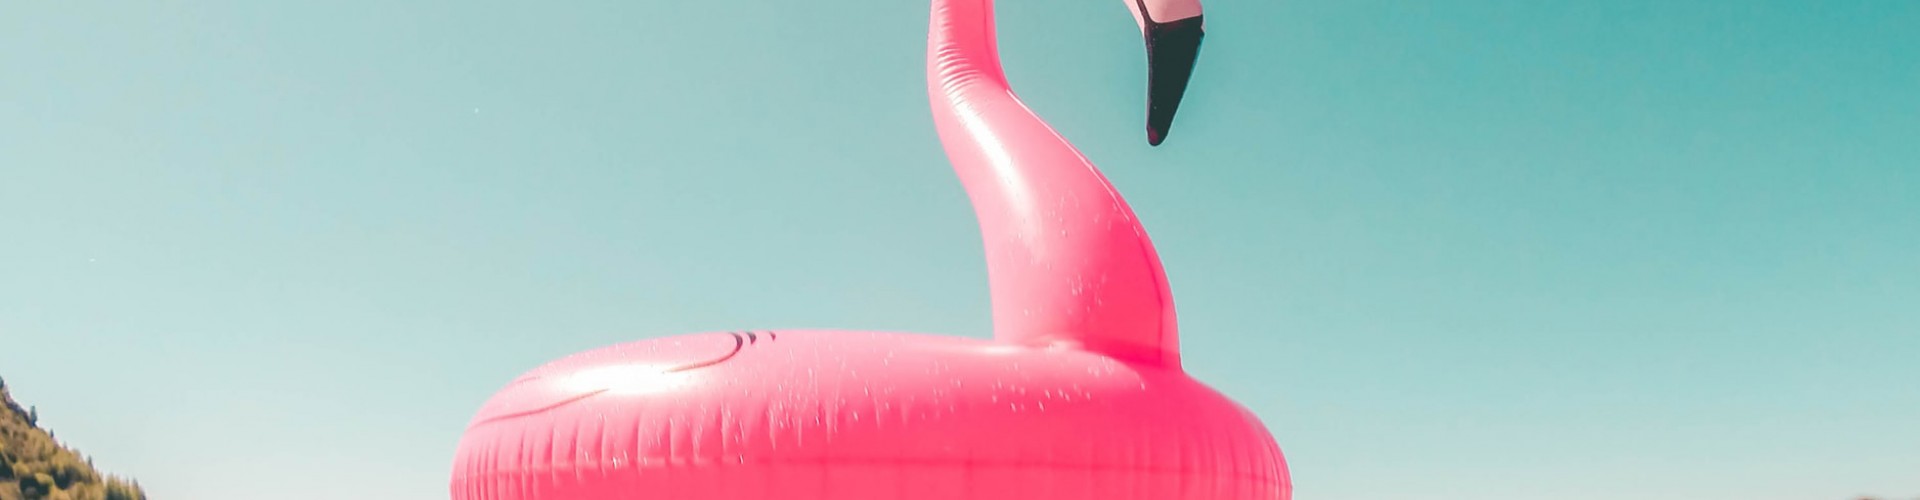 inflatable flamingo on water sunny day